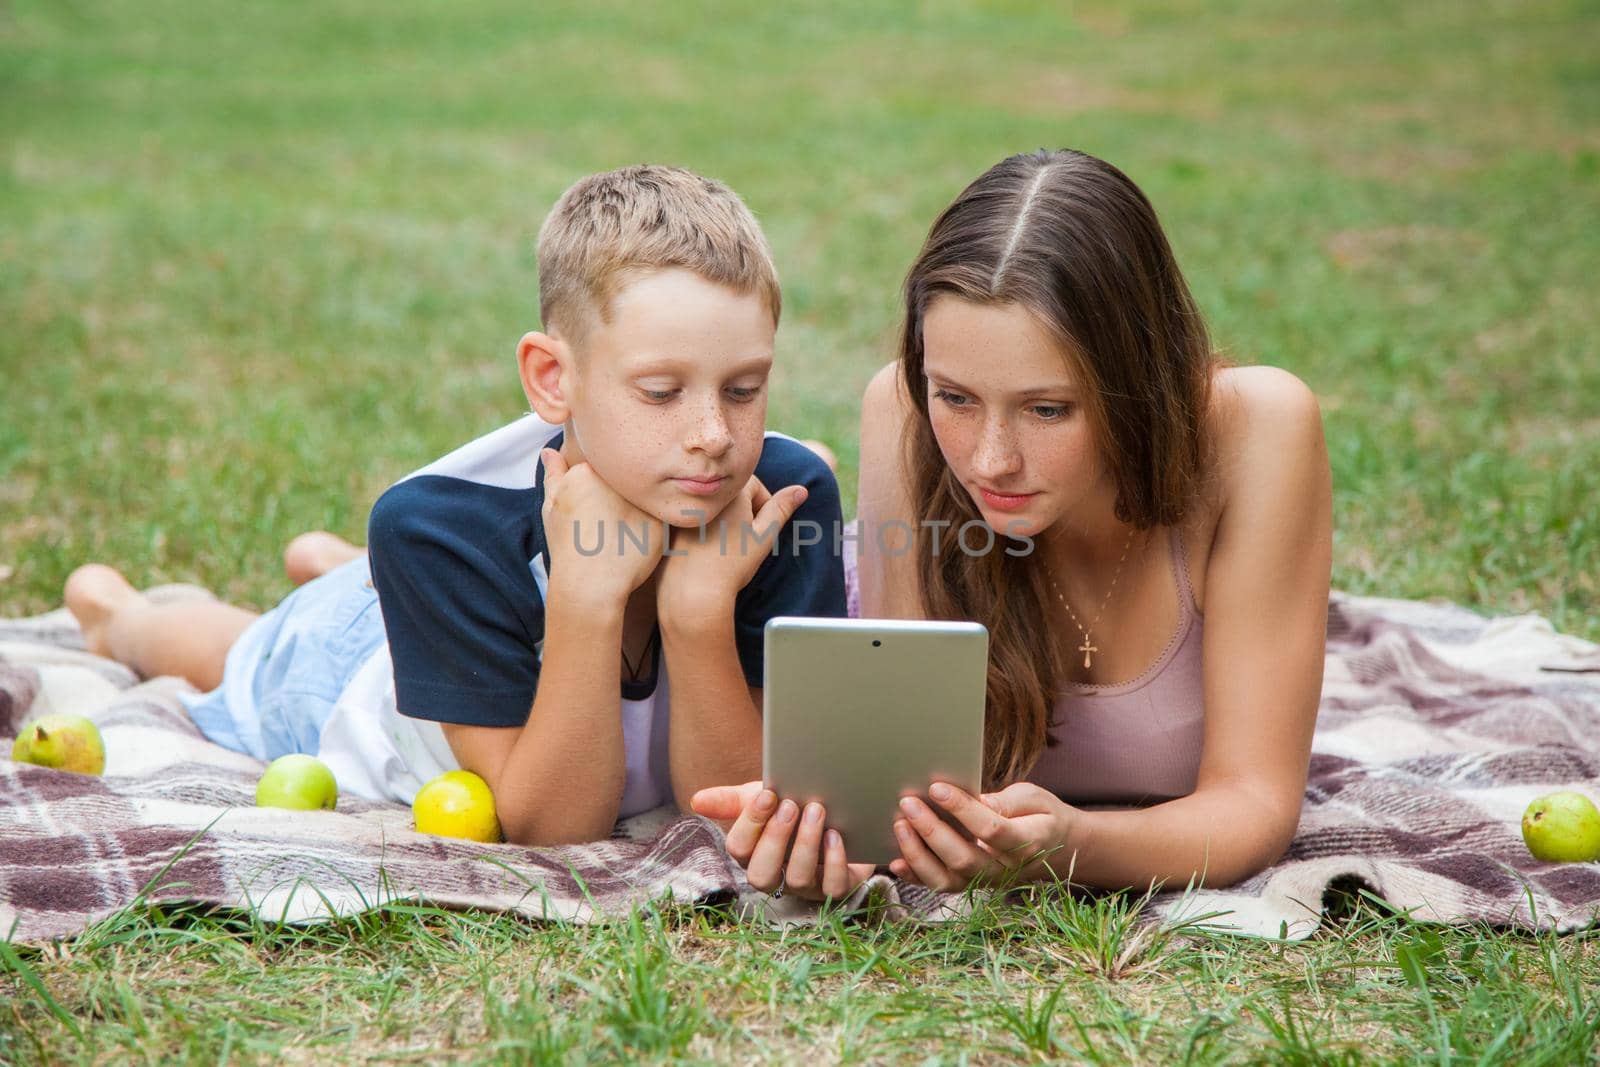 Young sister and brother with freckles on their faces lying down on plaid and using tablet in park. looking at tablet display, top view.